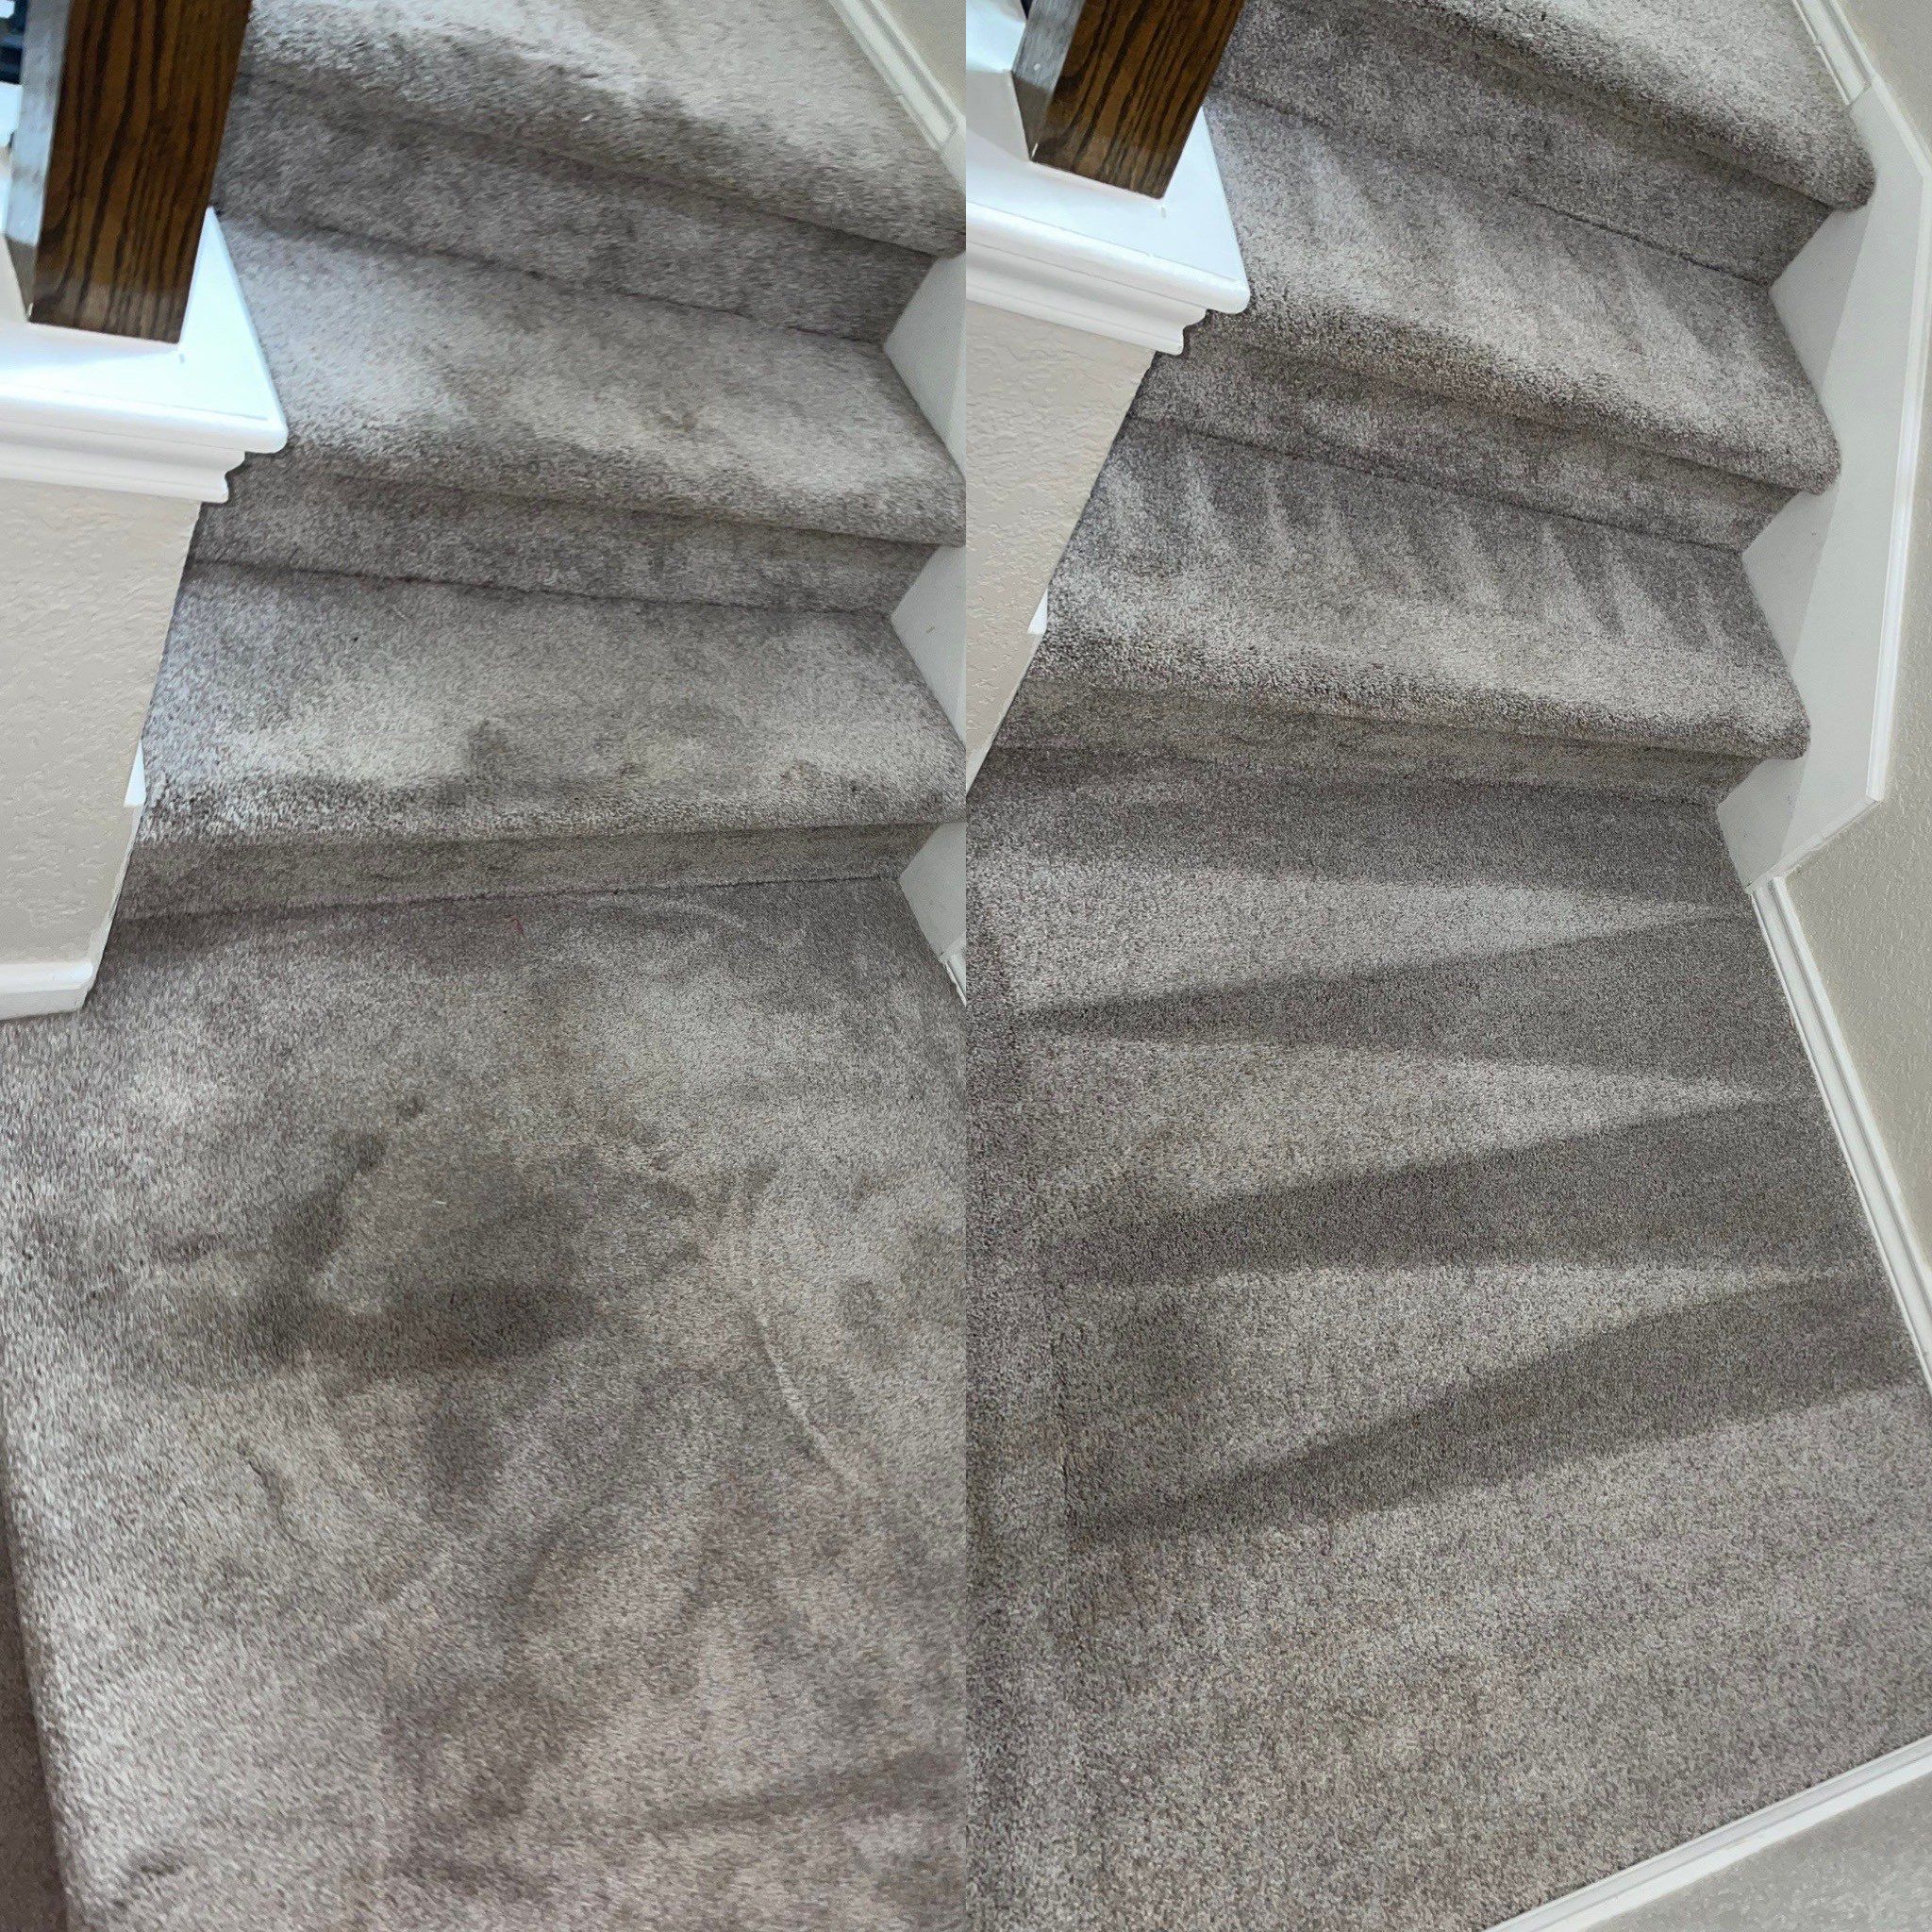 Carpet Cleaning Project in San Antonio TX 78259